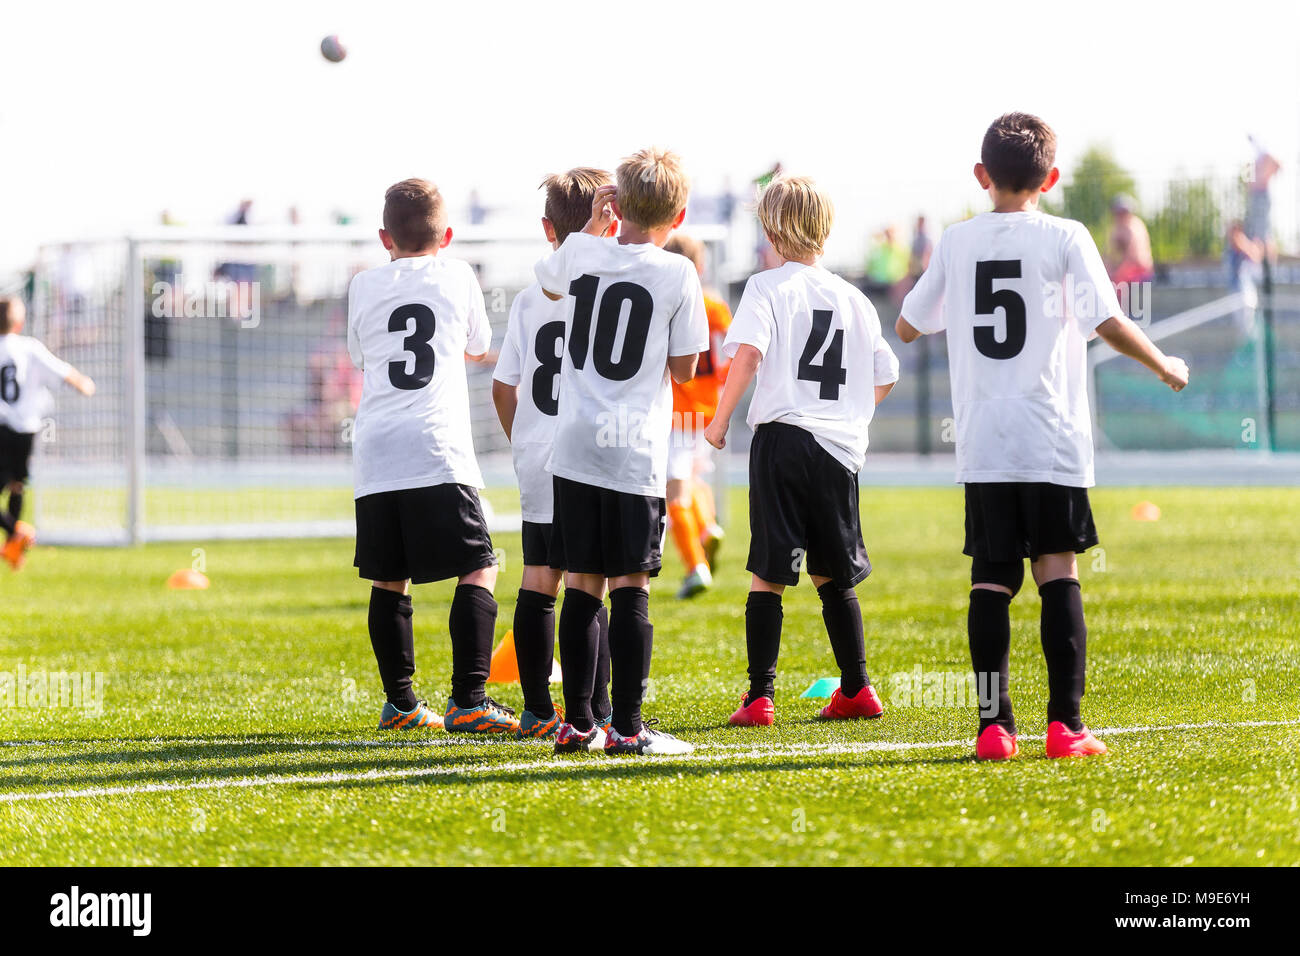 Kids Football Team. Young Boys Watching Soccer Match. Football Tournament Competition in the Background. Children Football Team Players on The Soccer  Stock Photo